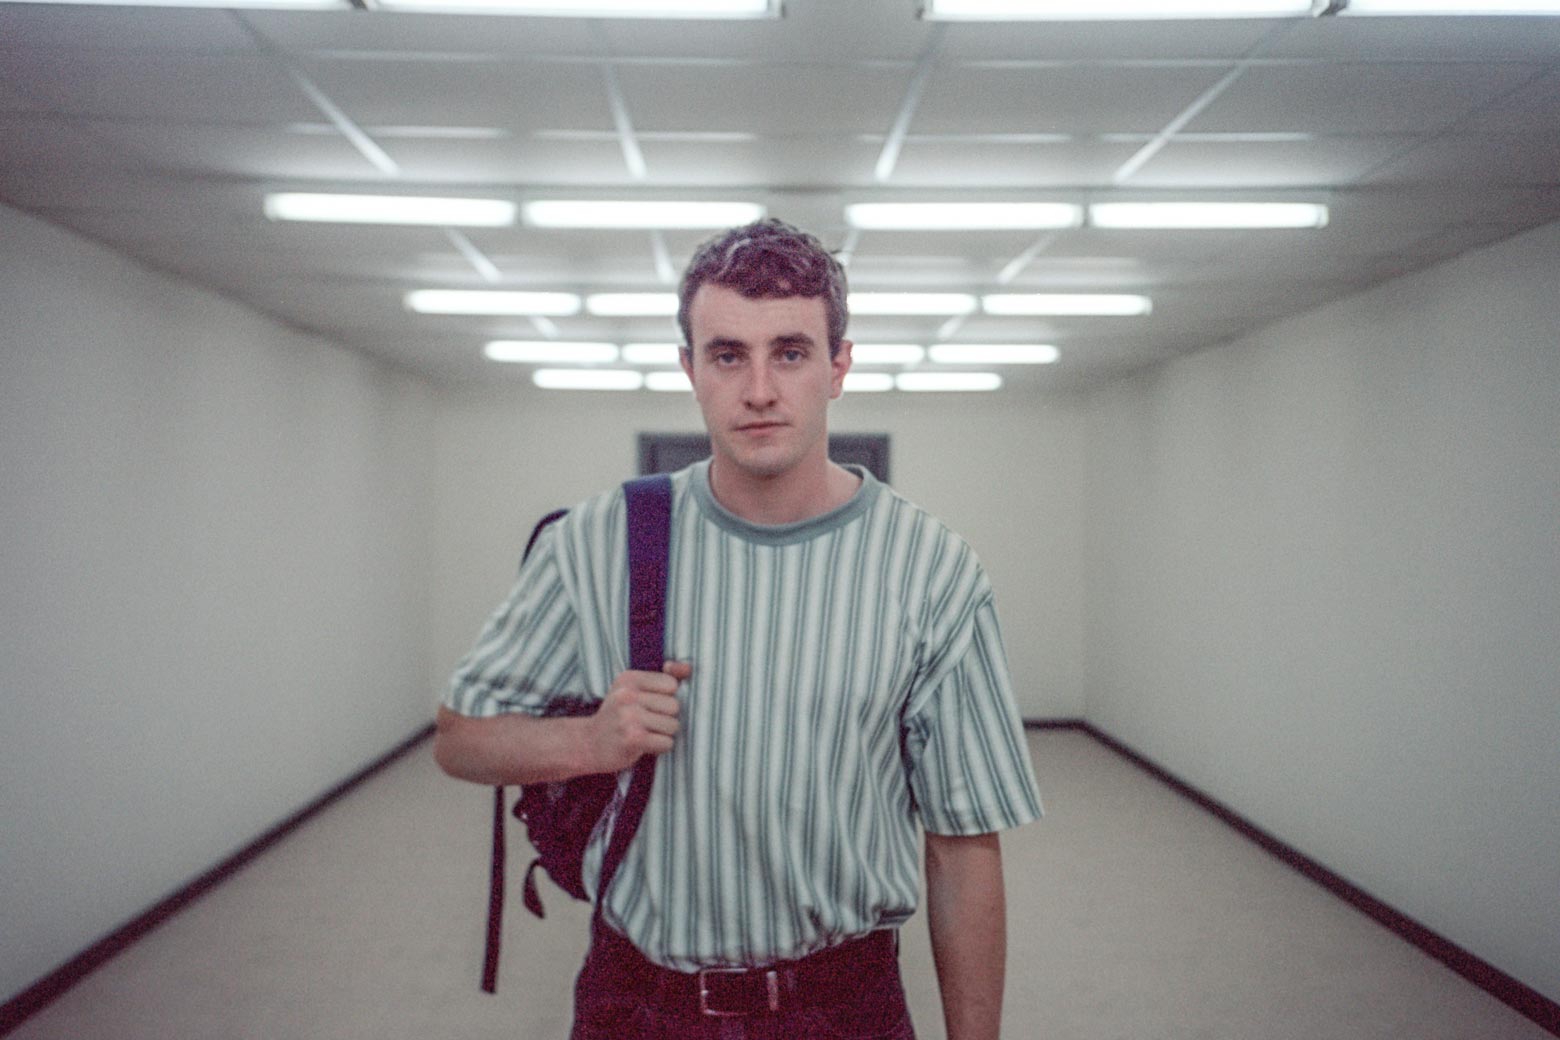 The handsome actor walks down a sterile looking white hallway, fluorescent lighting overhead, a somber expression on his face, one strap of a backpack over his tucked-in '90s-looking vertical stripe t-shirt